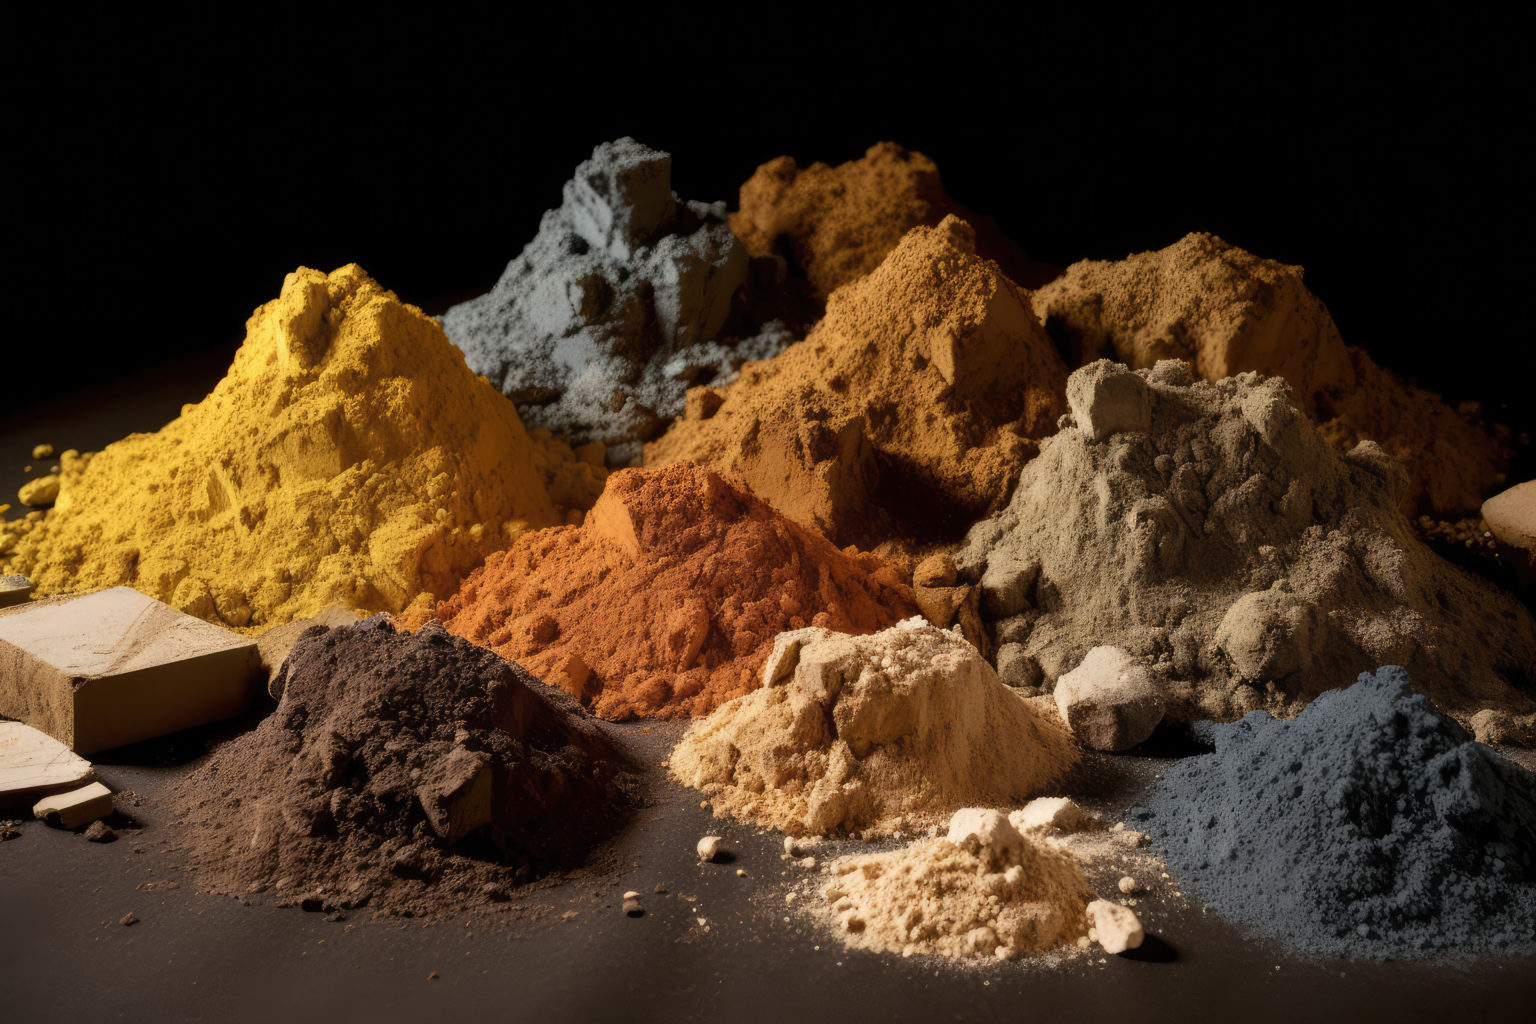 Western miners seek premium pricing for rare earth metals to break China grip